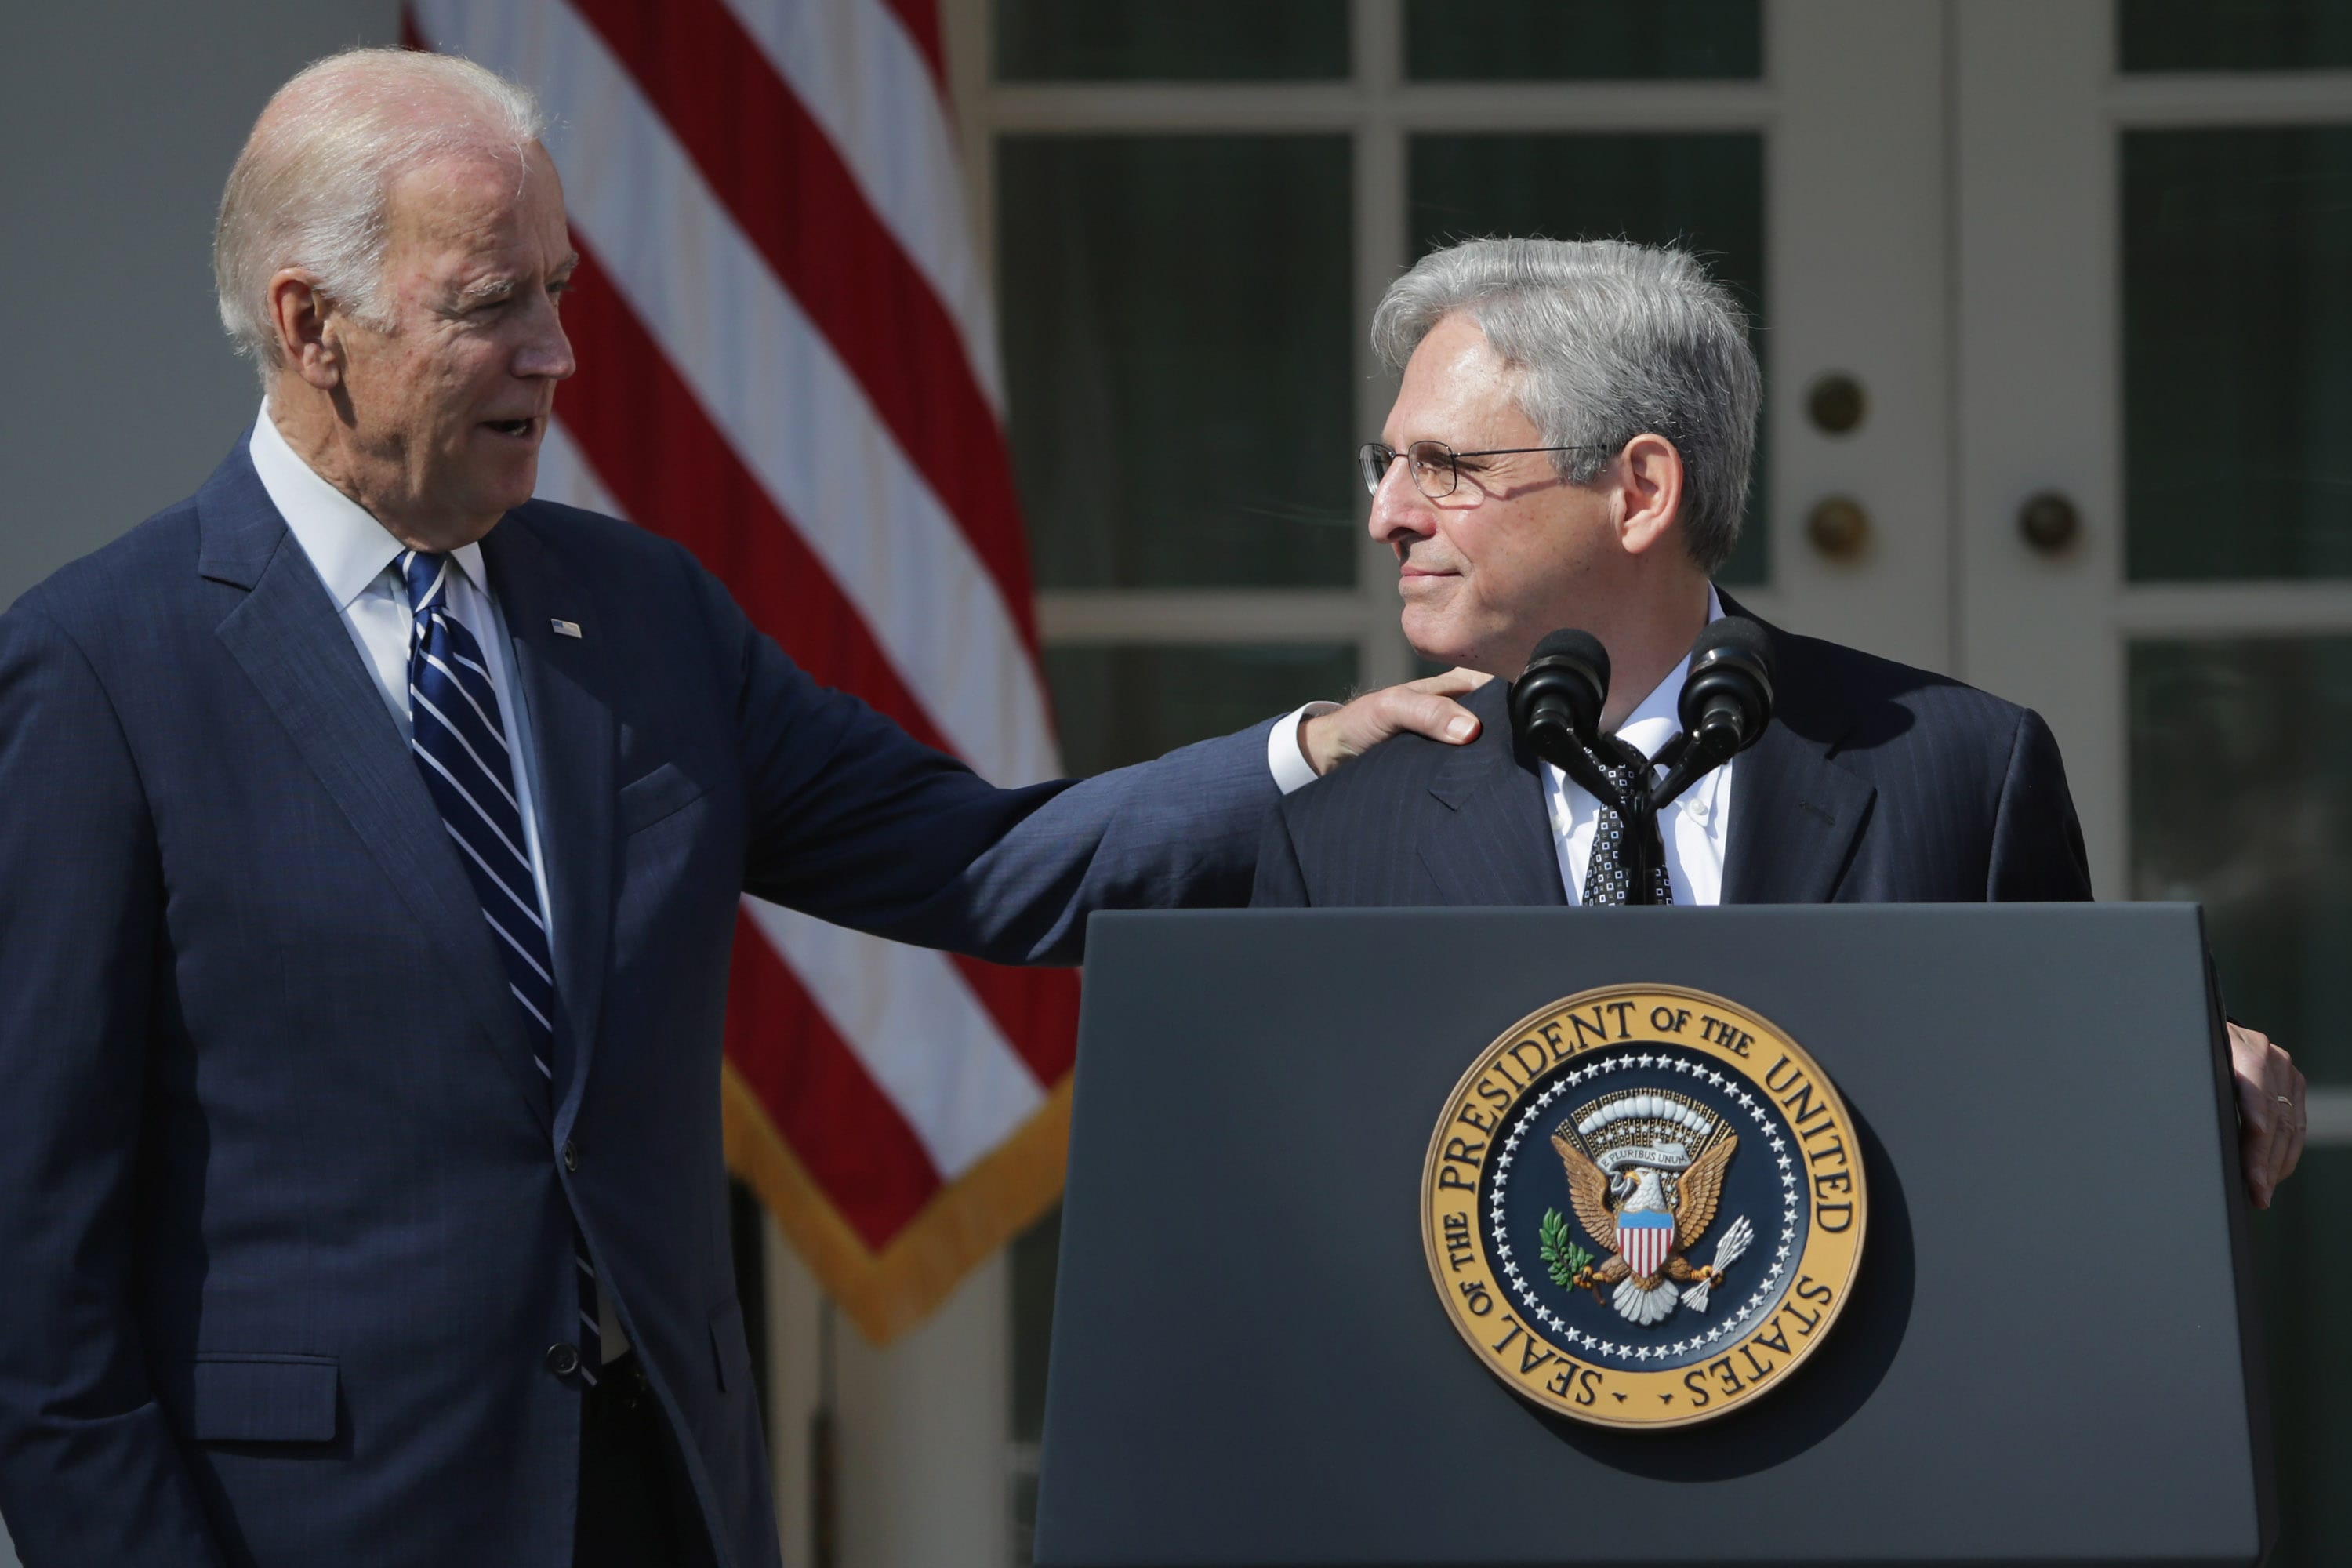 Biden introduces Attorney General Merrick Garland, and pledges independence from DOJ